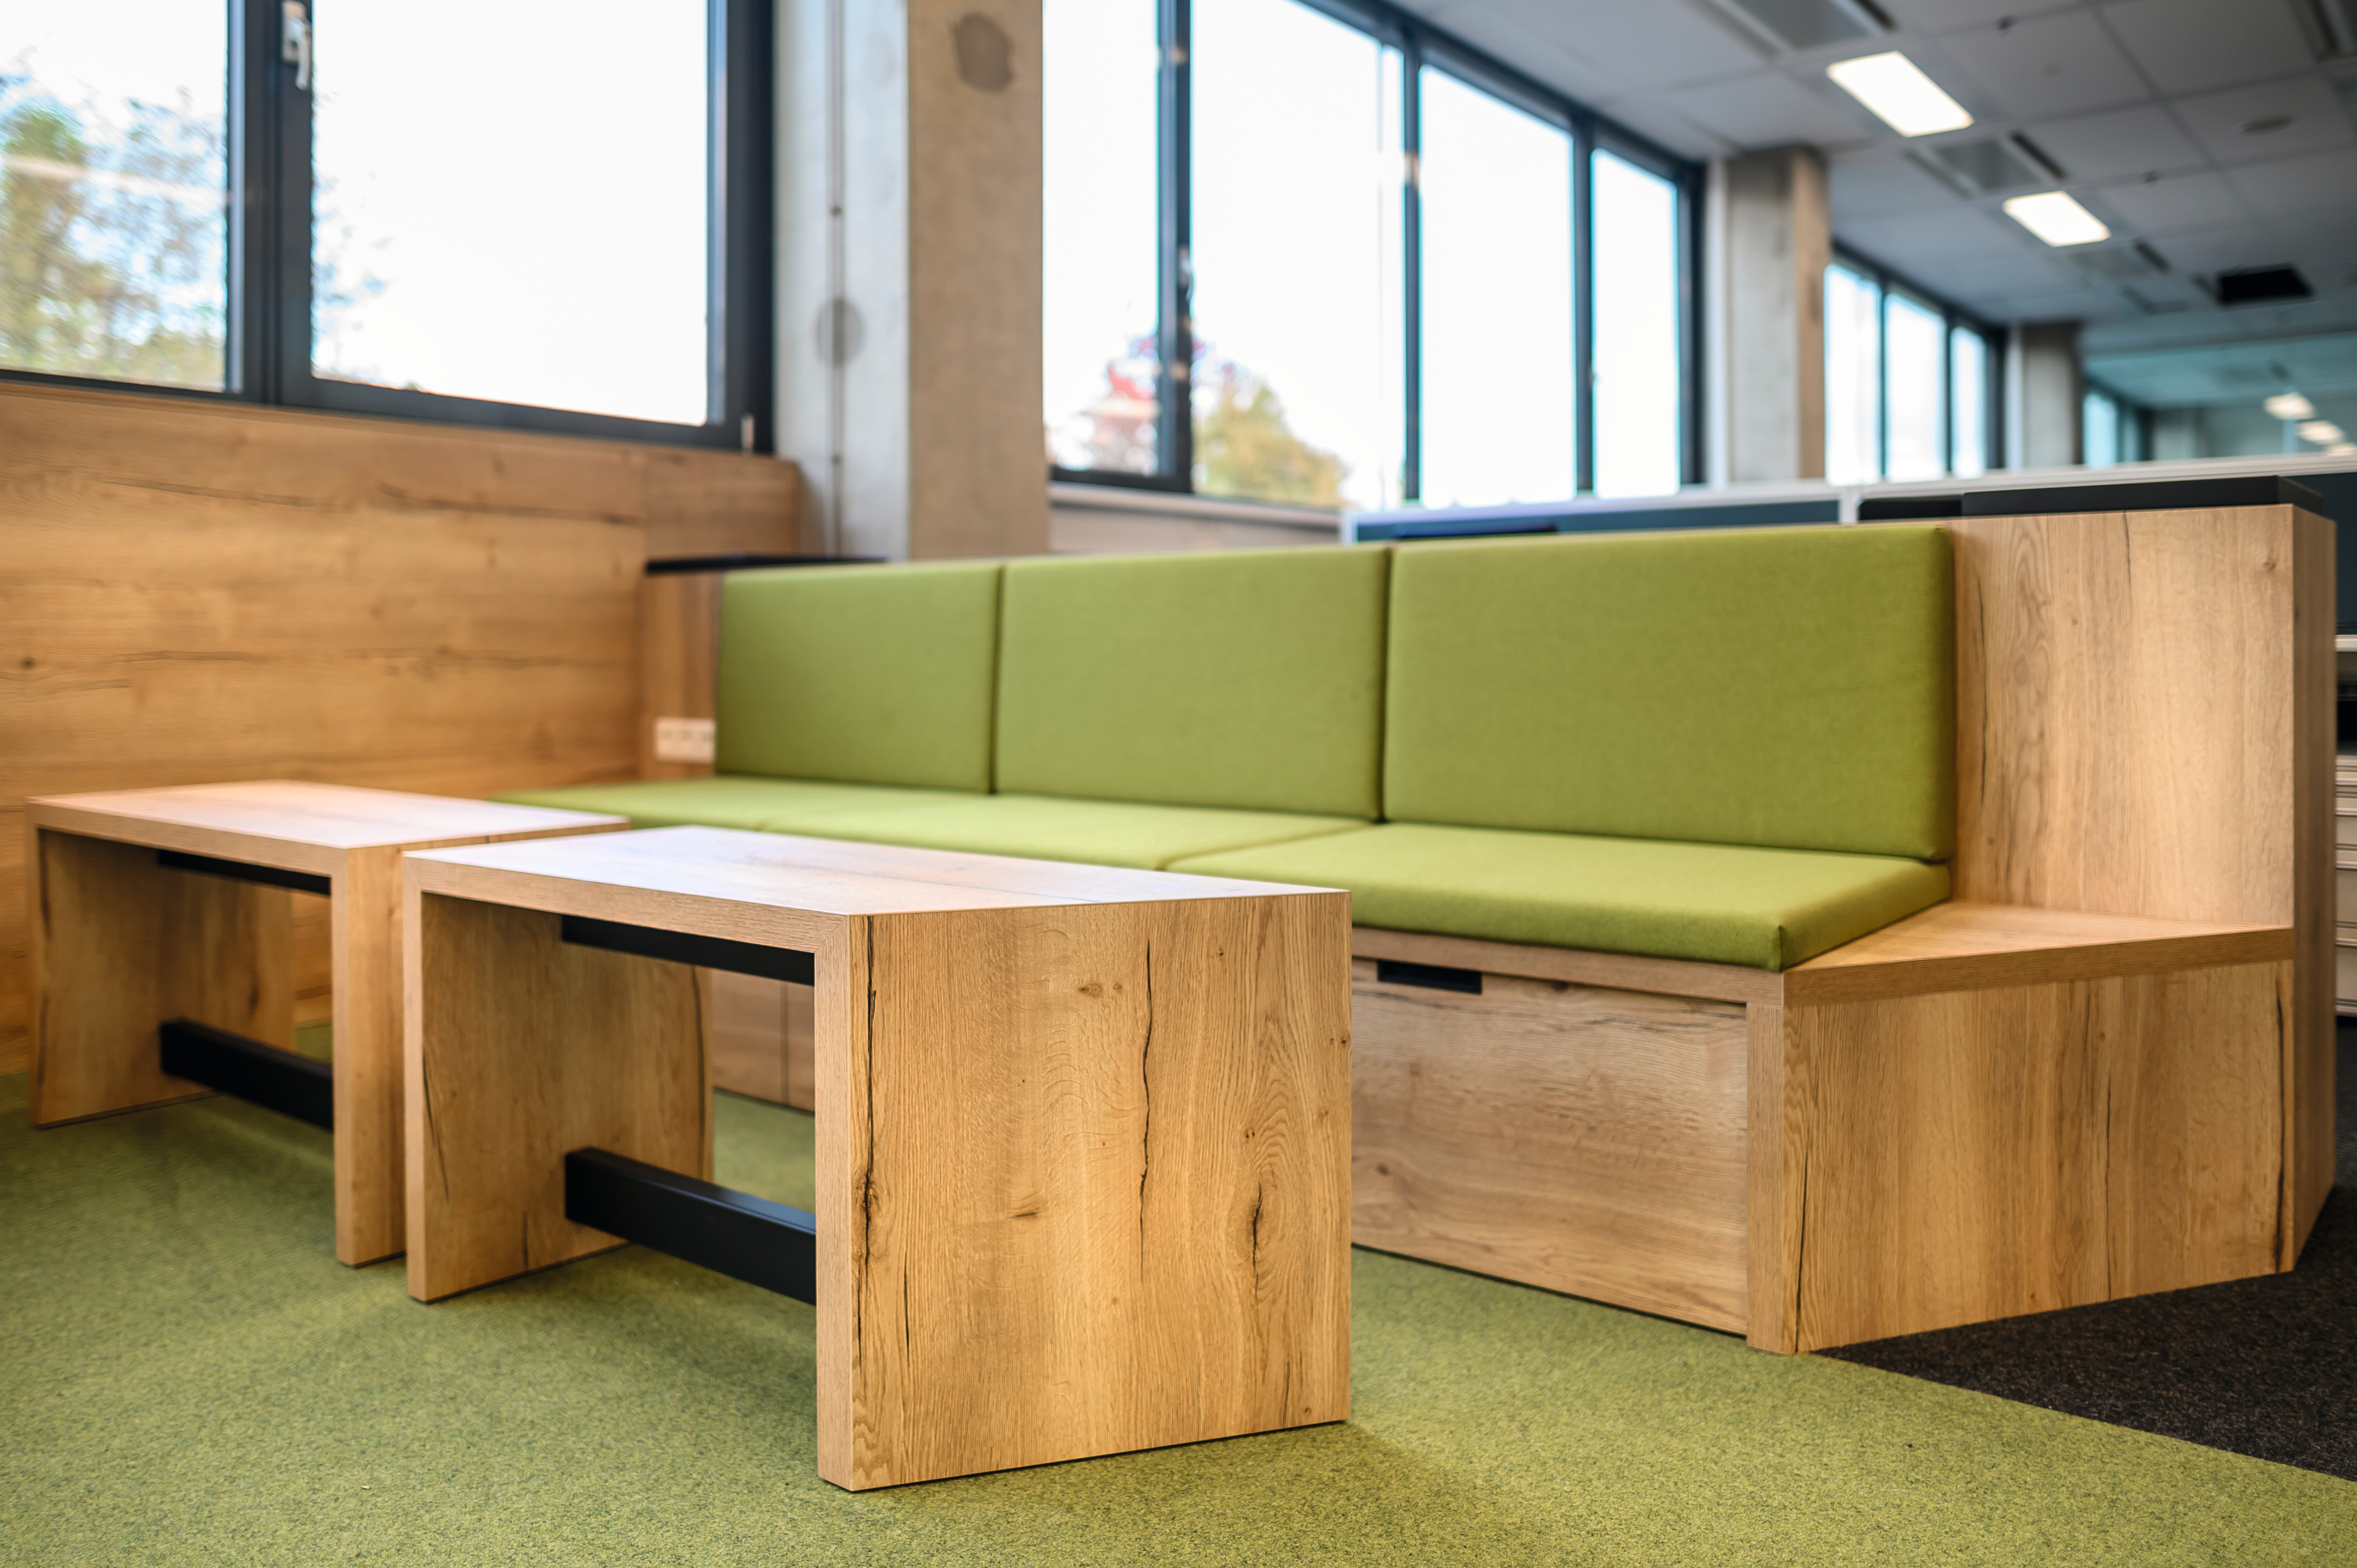  Tables with benches, designed in a wood look and combined with light green upholstery, are perfect for taking a relaxing break.